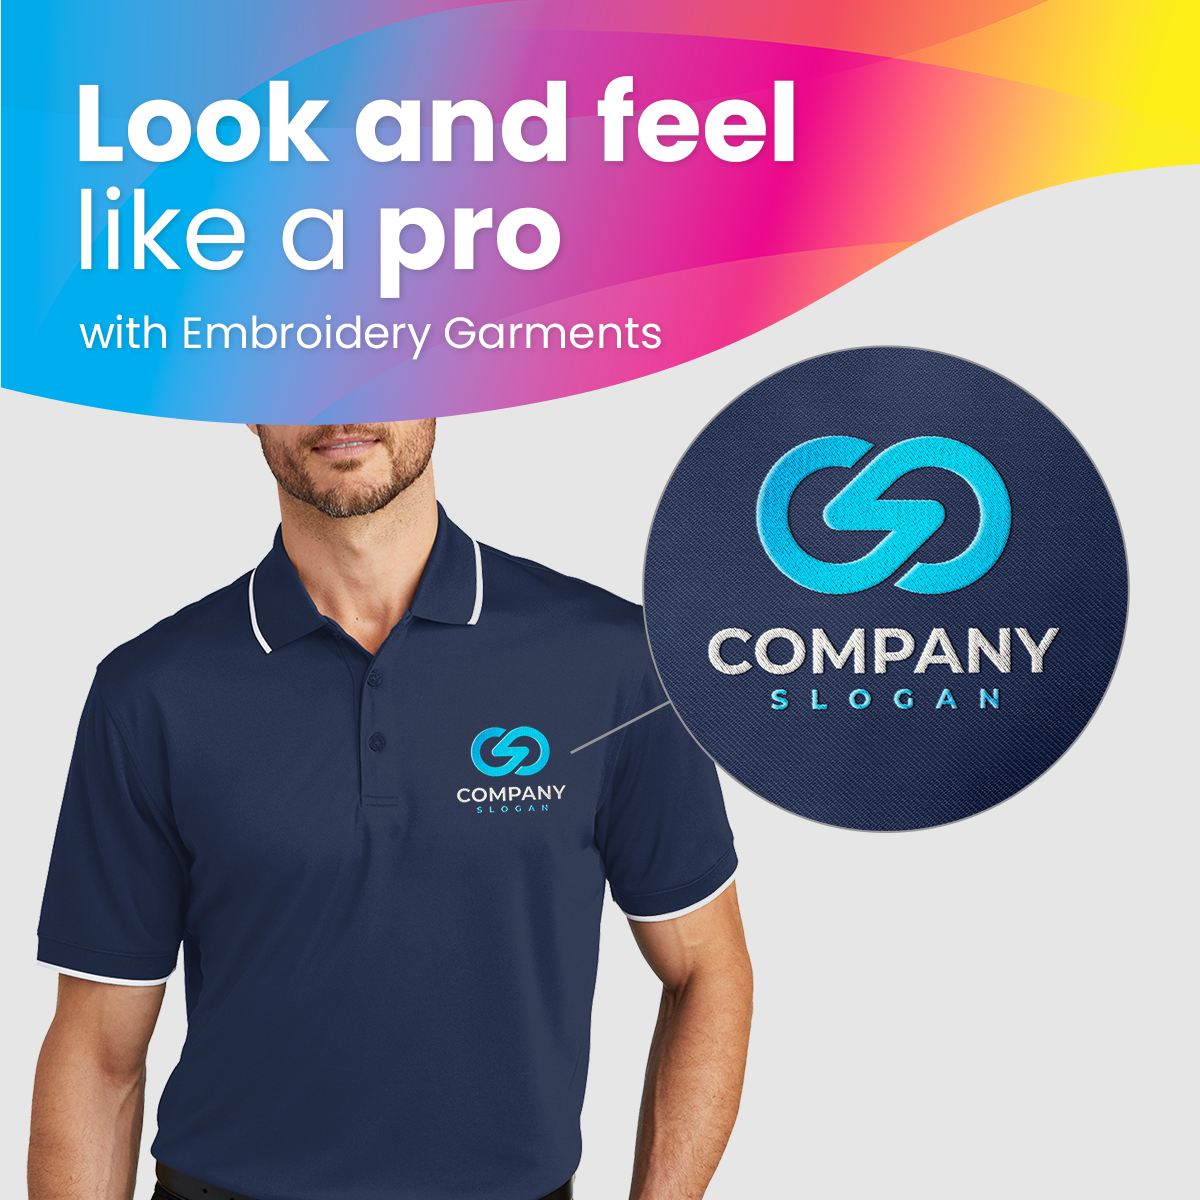 Cubo Print, Uniforms Polos Embroidery,